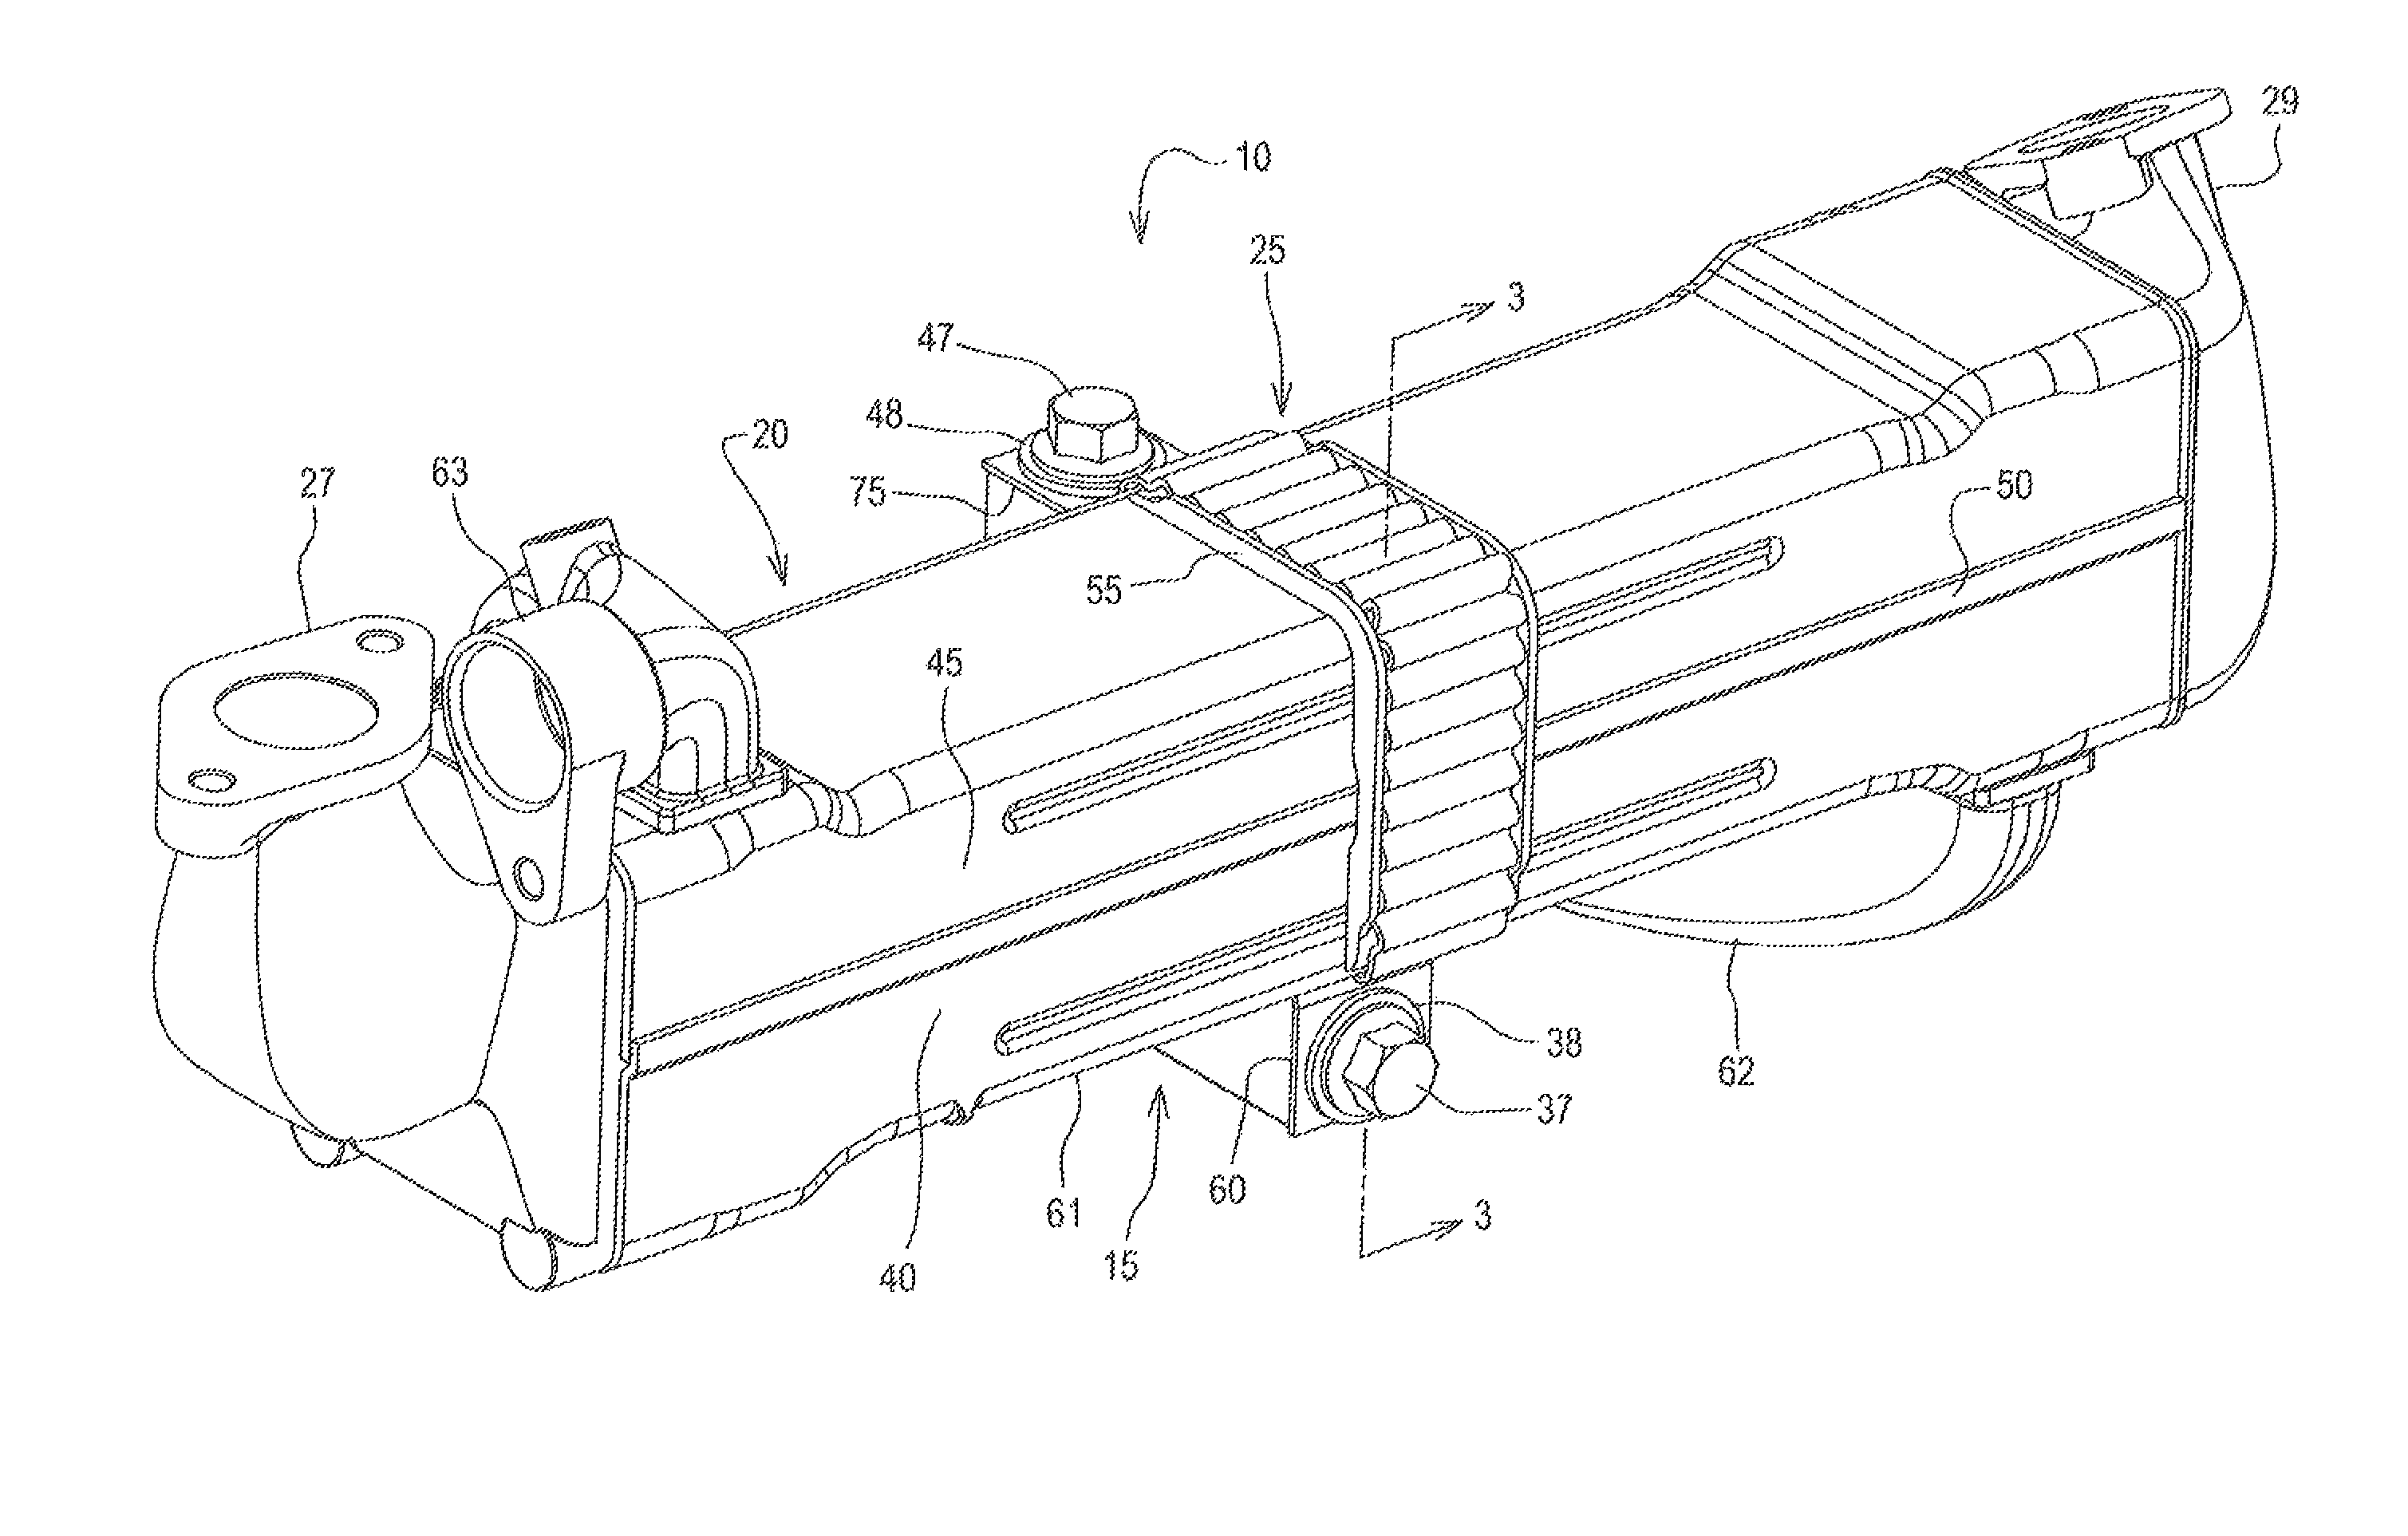 Corrugated strap for securing a heat exchanger